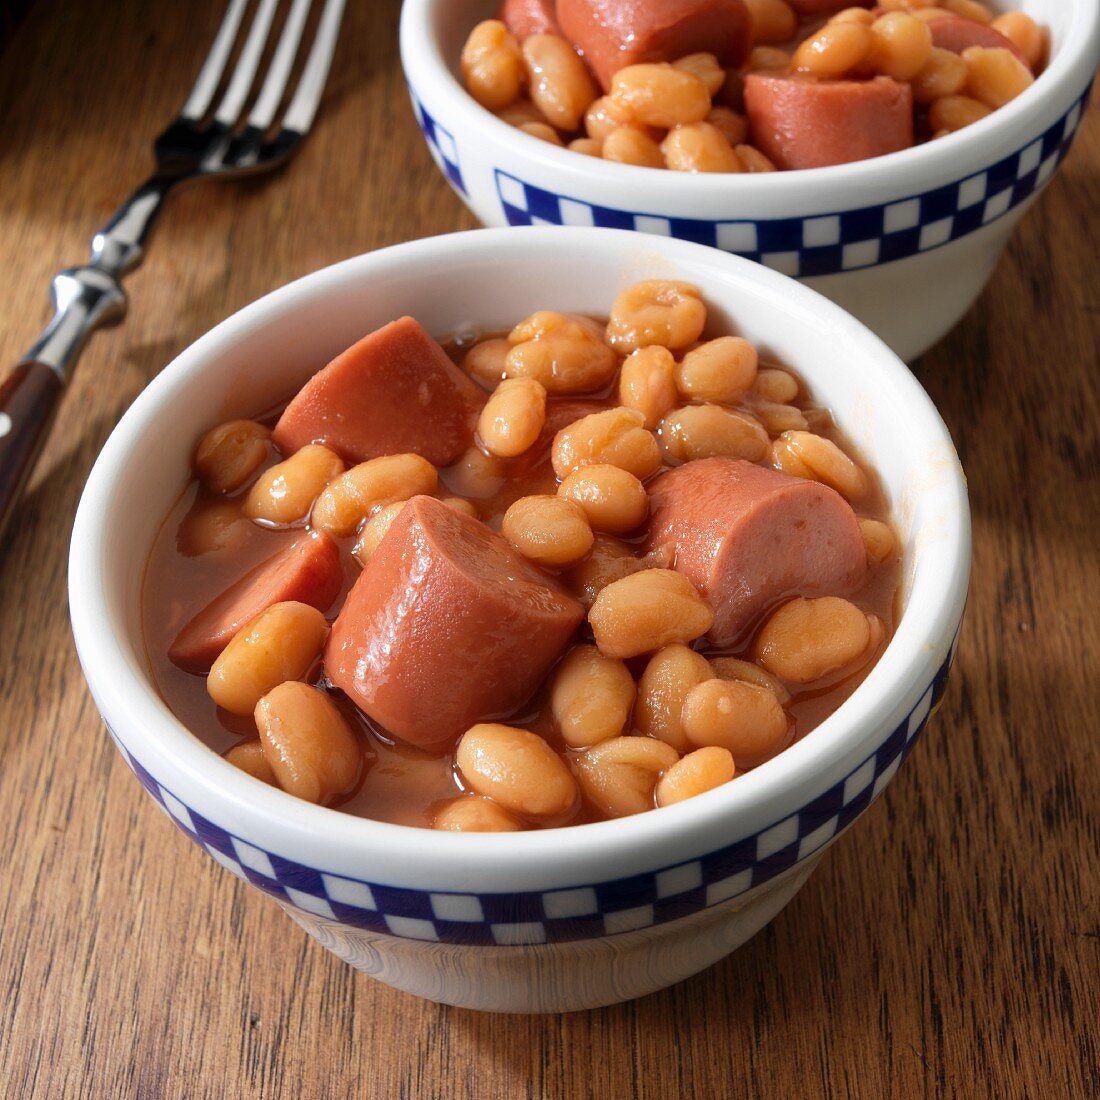 Frankfurters with baked beans in two serving bowls